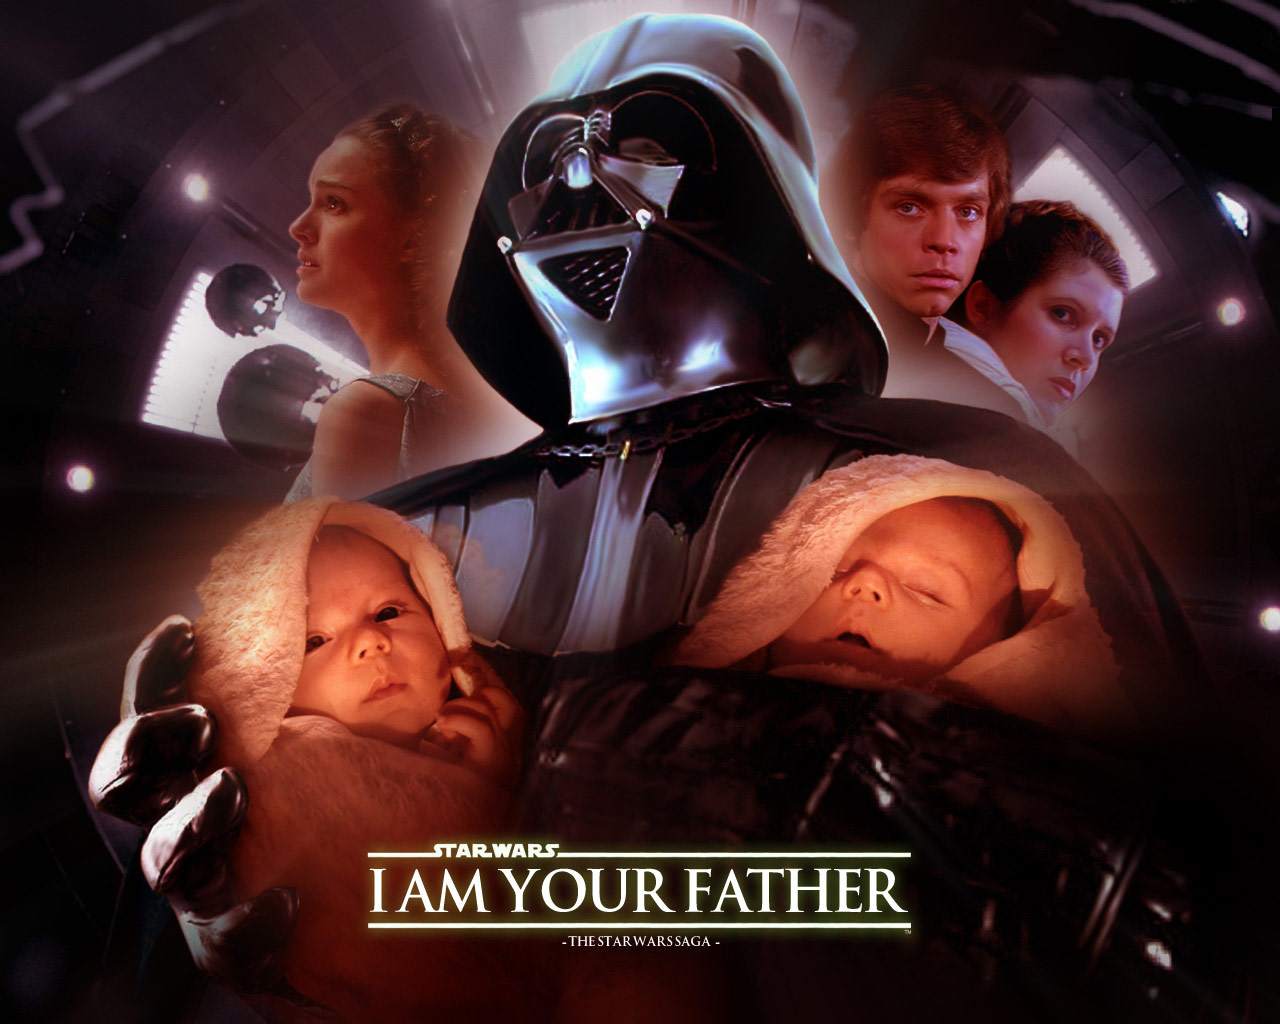 I am your father